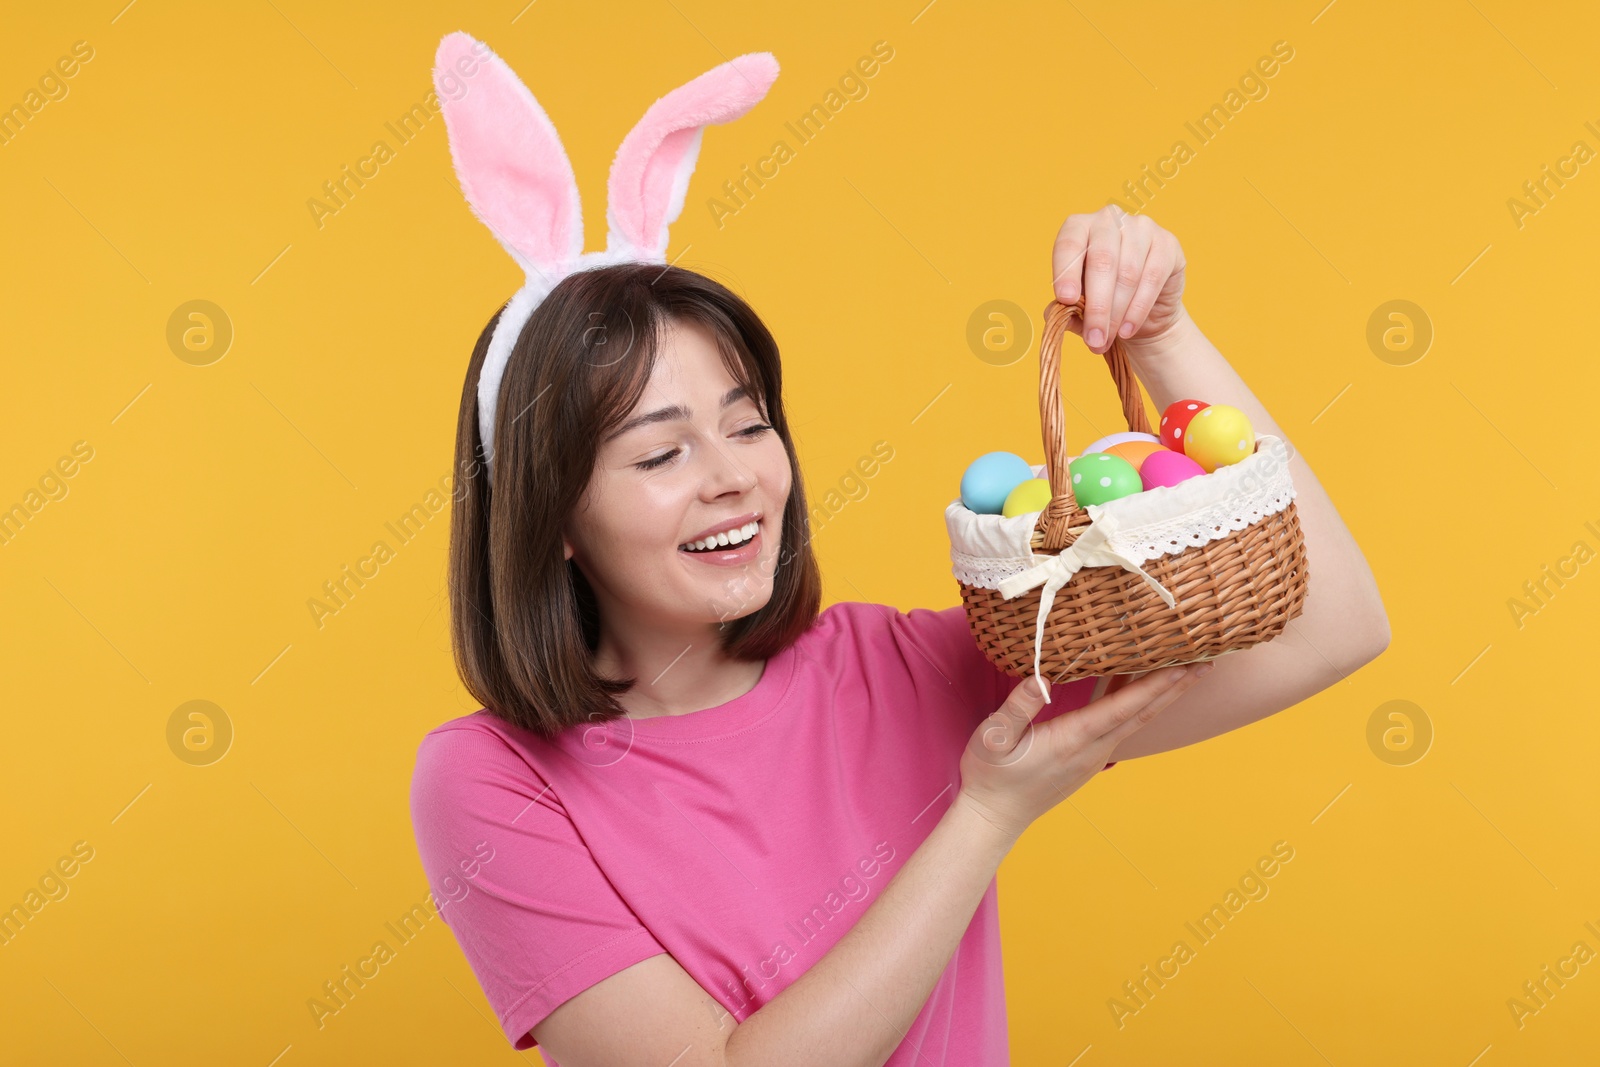 Photo of Easter celebration. Happy woman with bunny ears and wicker basket full of painted eggs on orange background